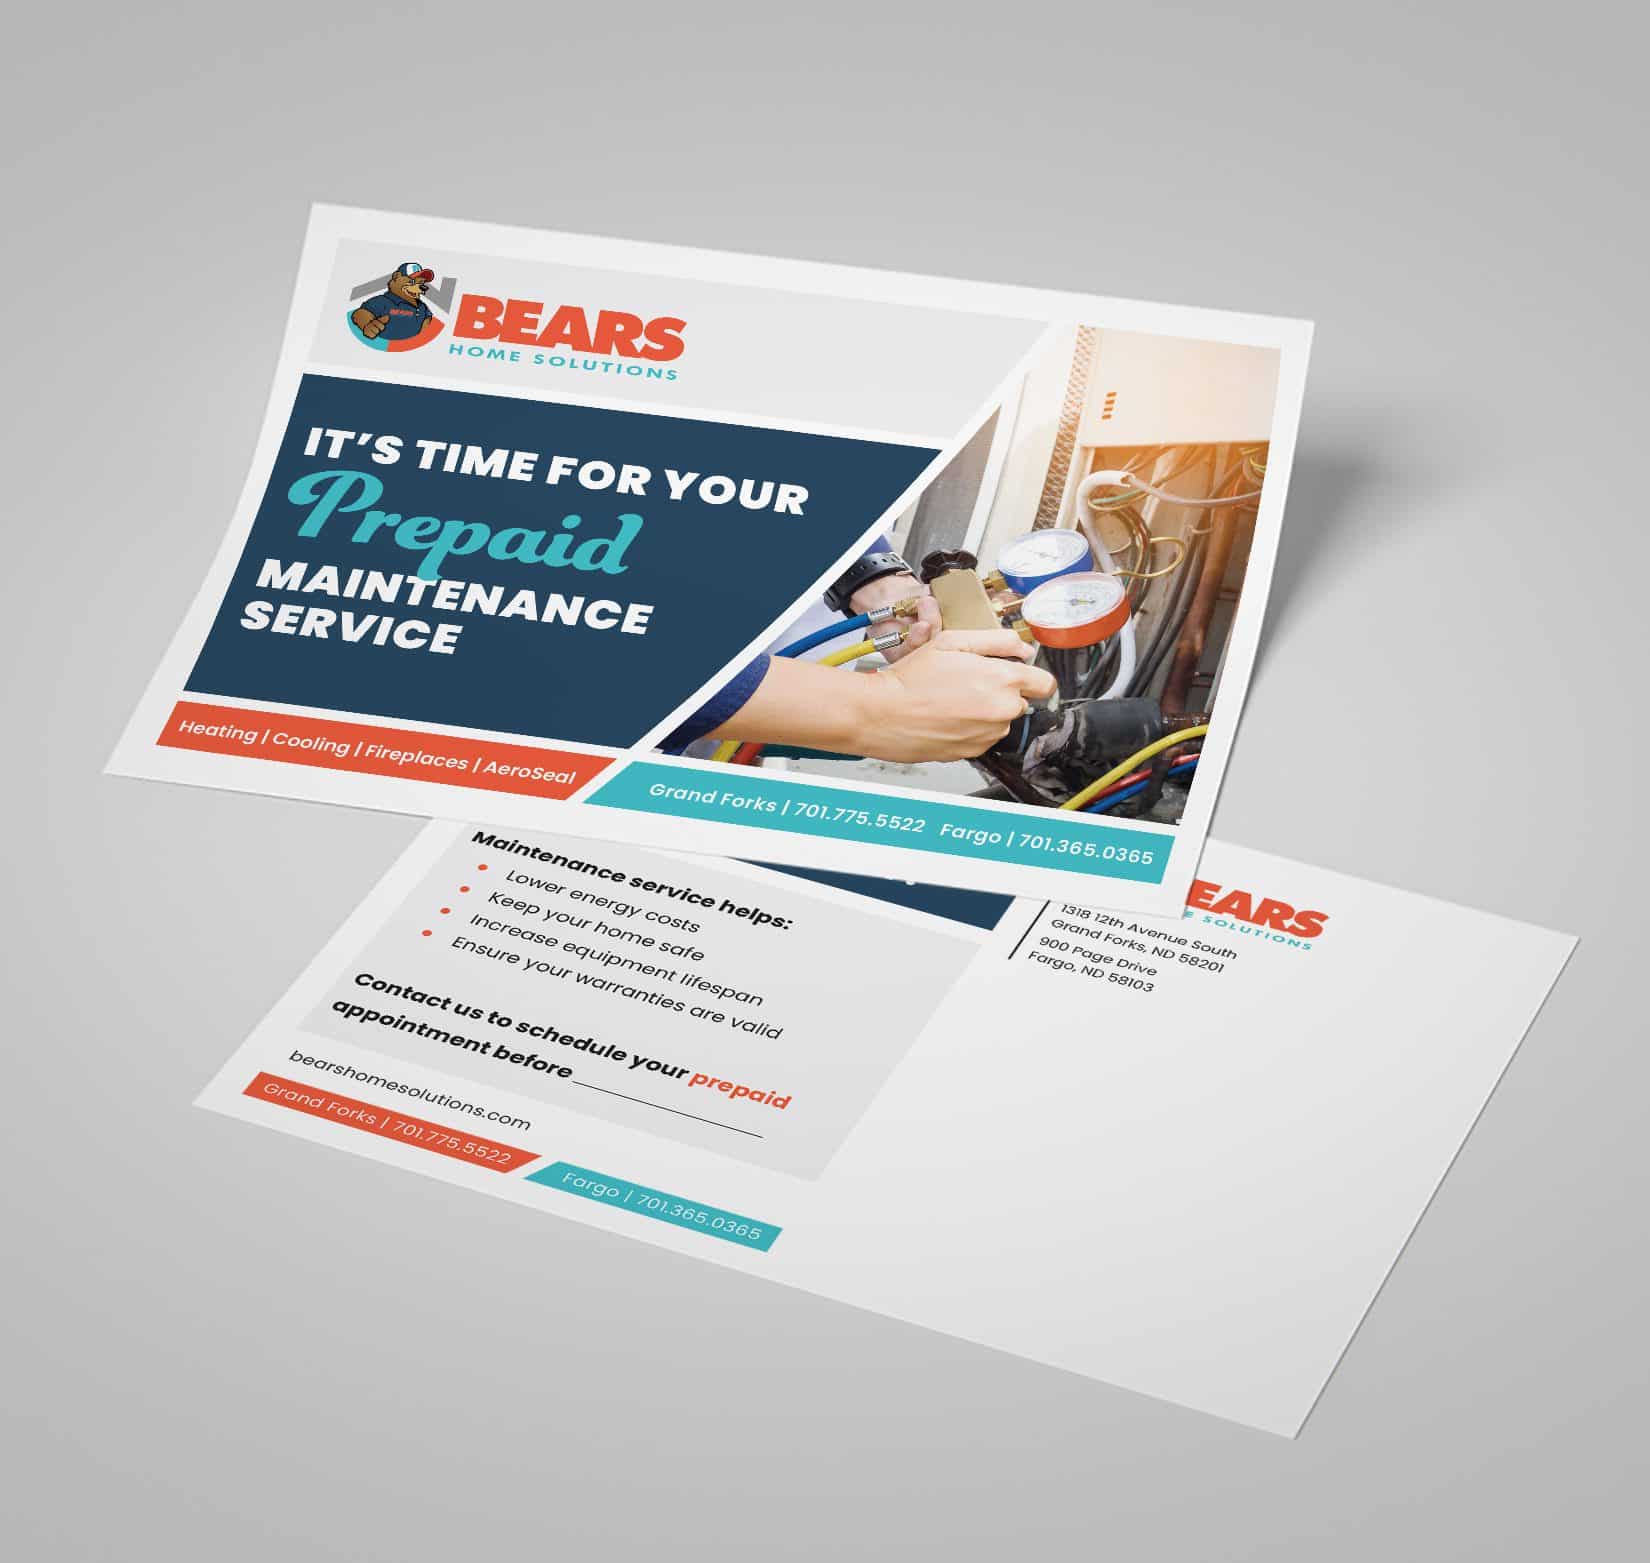 Two designed and printed postcards for Bears Home Solutions on a white background